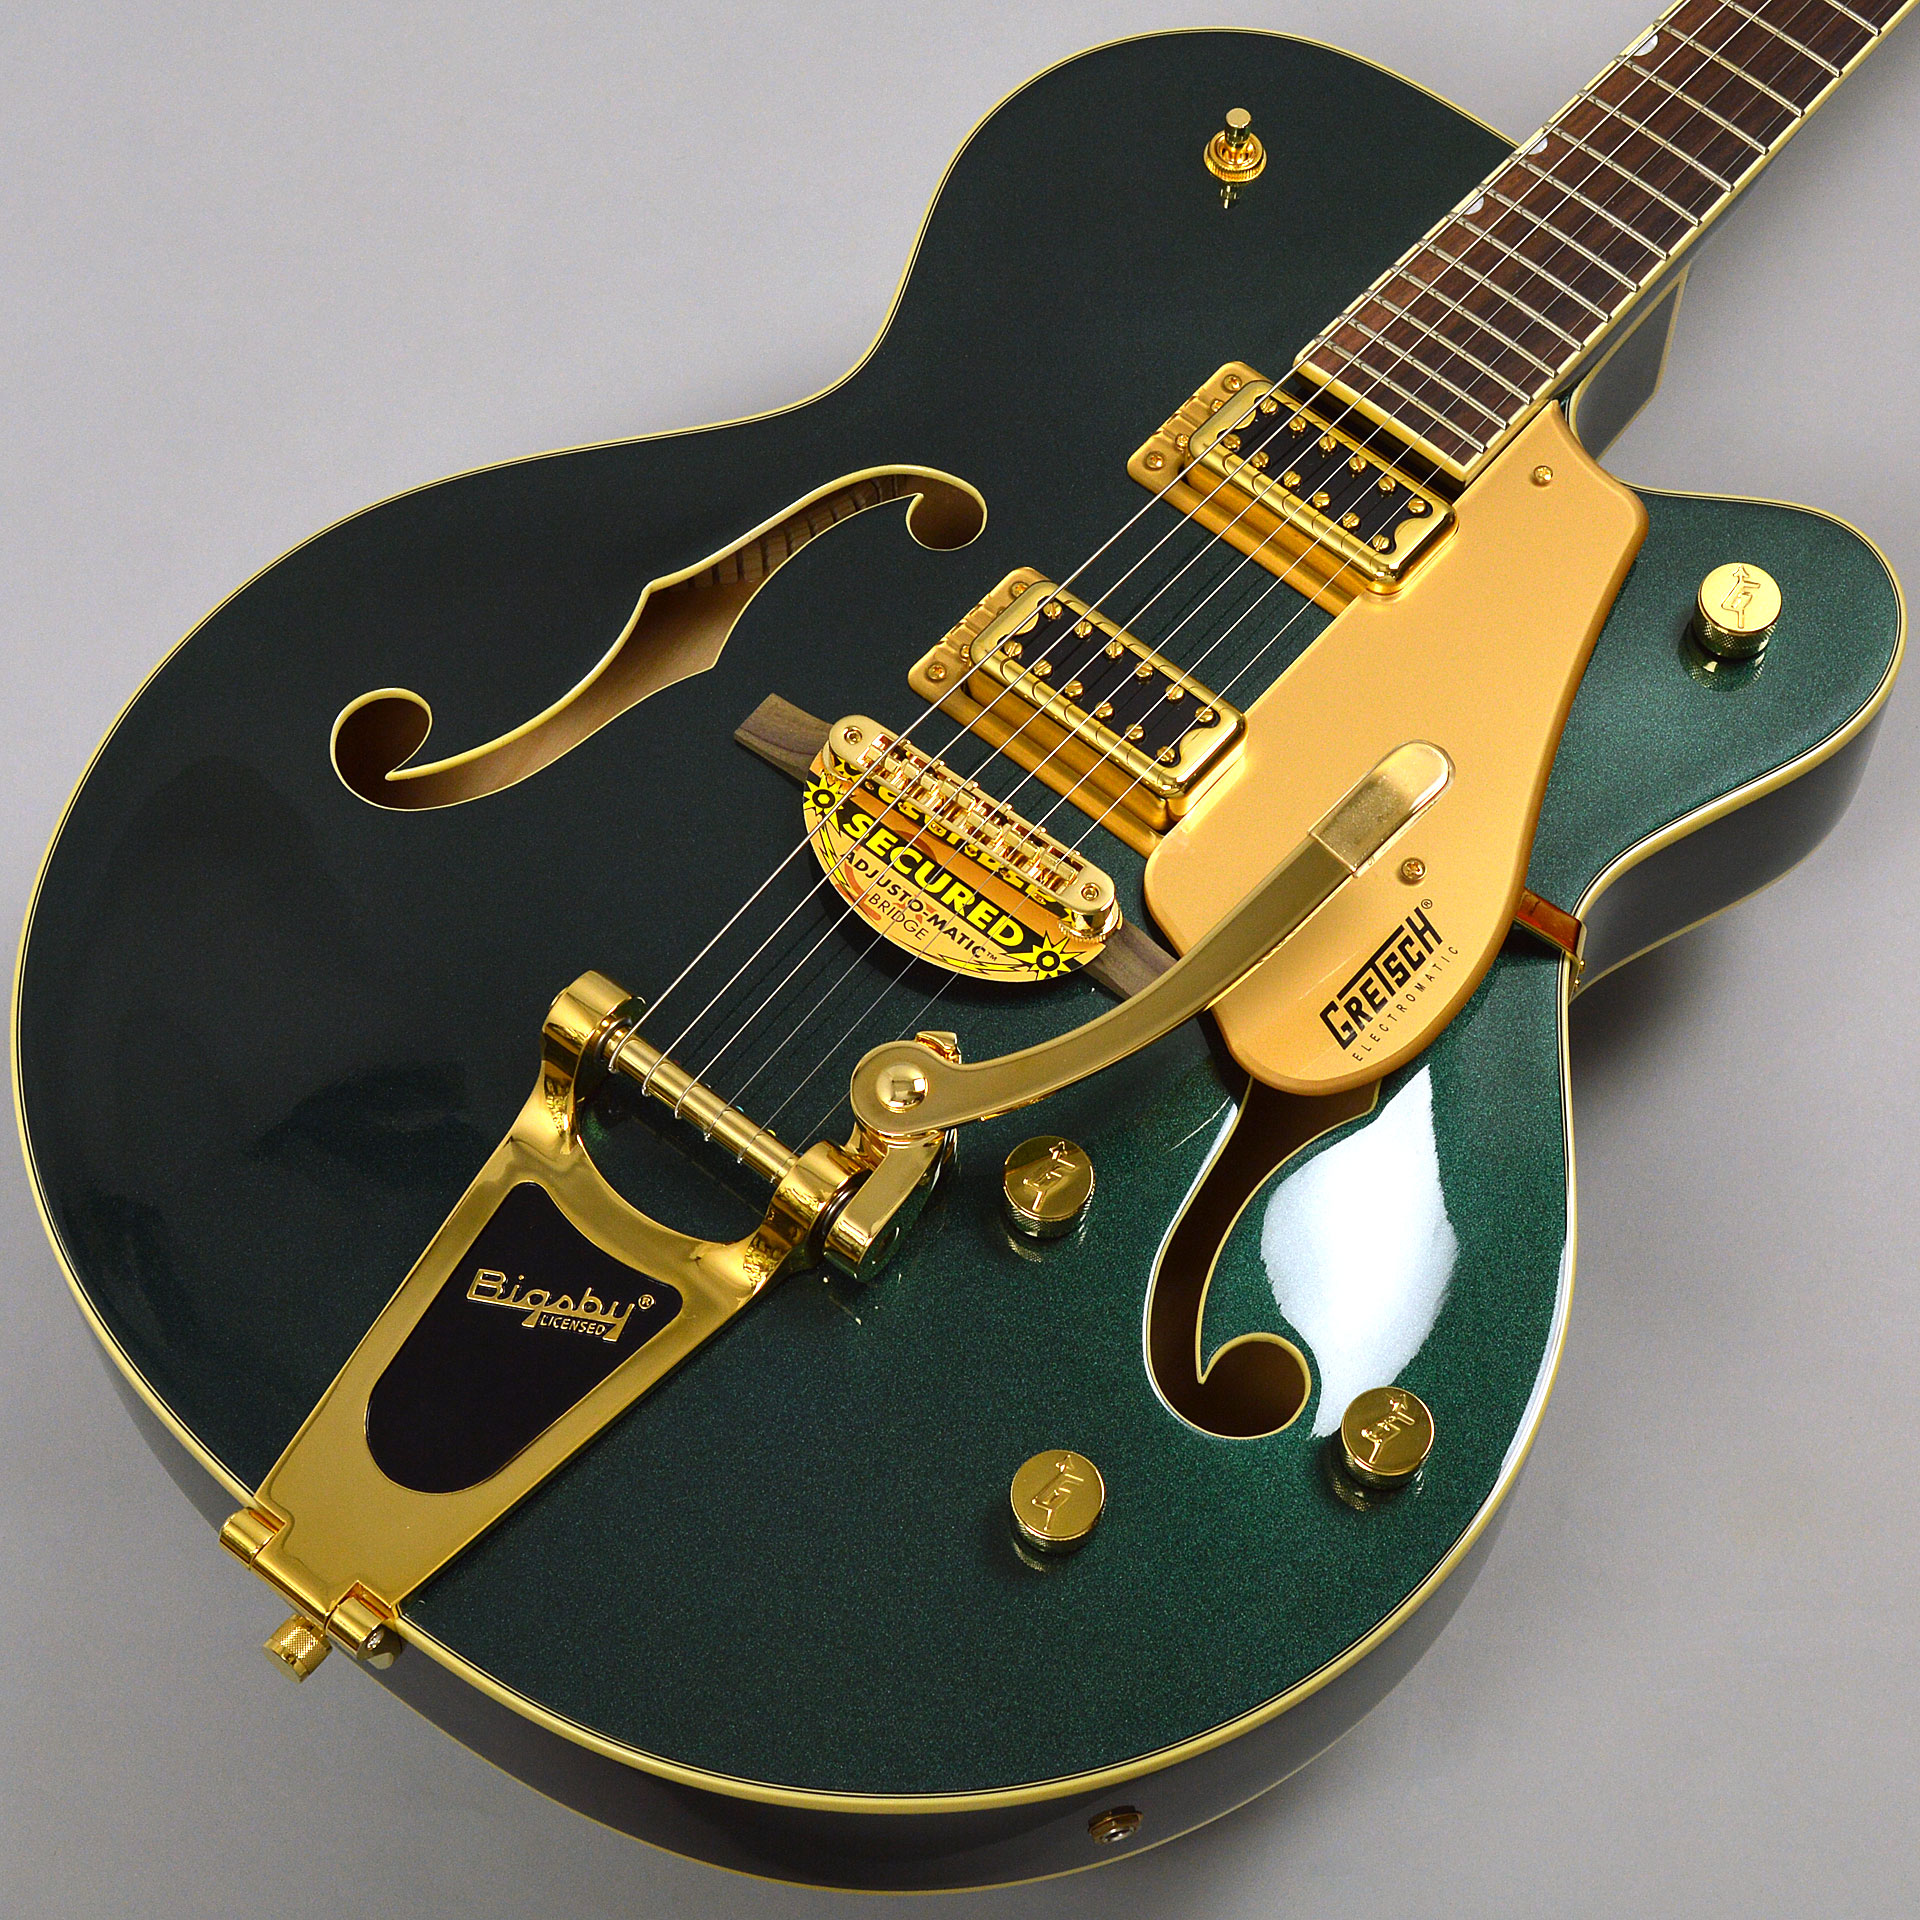 GRETSCH G5420TG Limited Edition Electromatic Hollow Body Single-Cut with Bigsbyサムネ画像